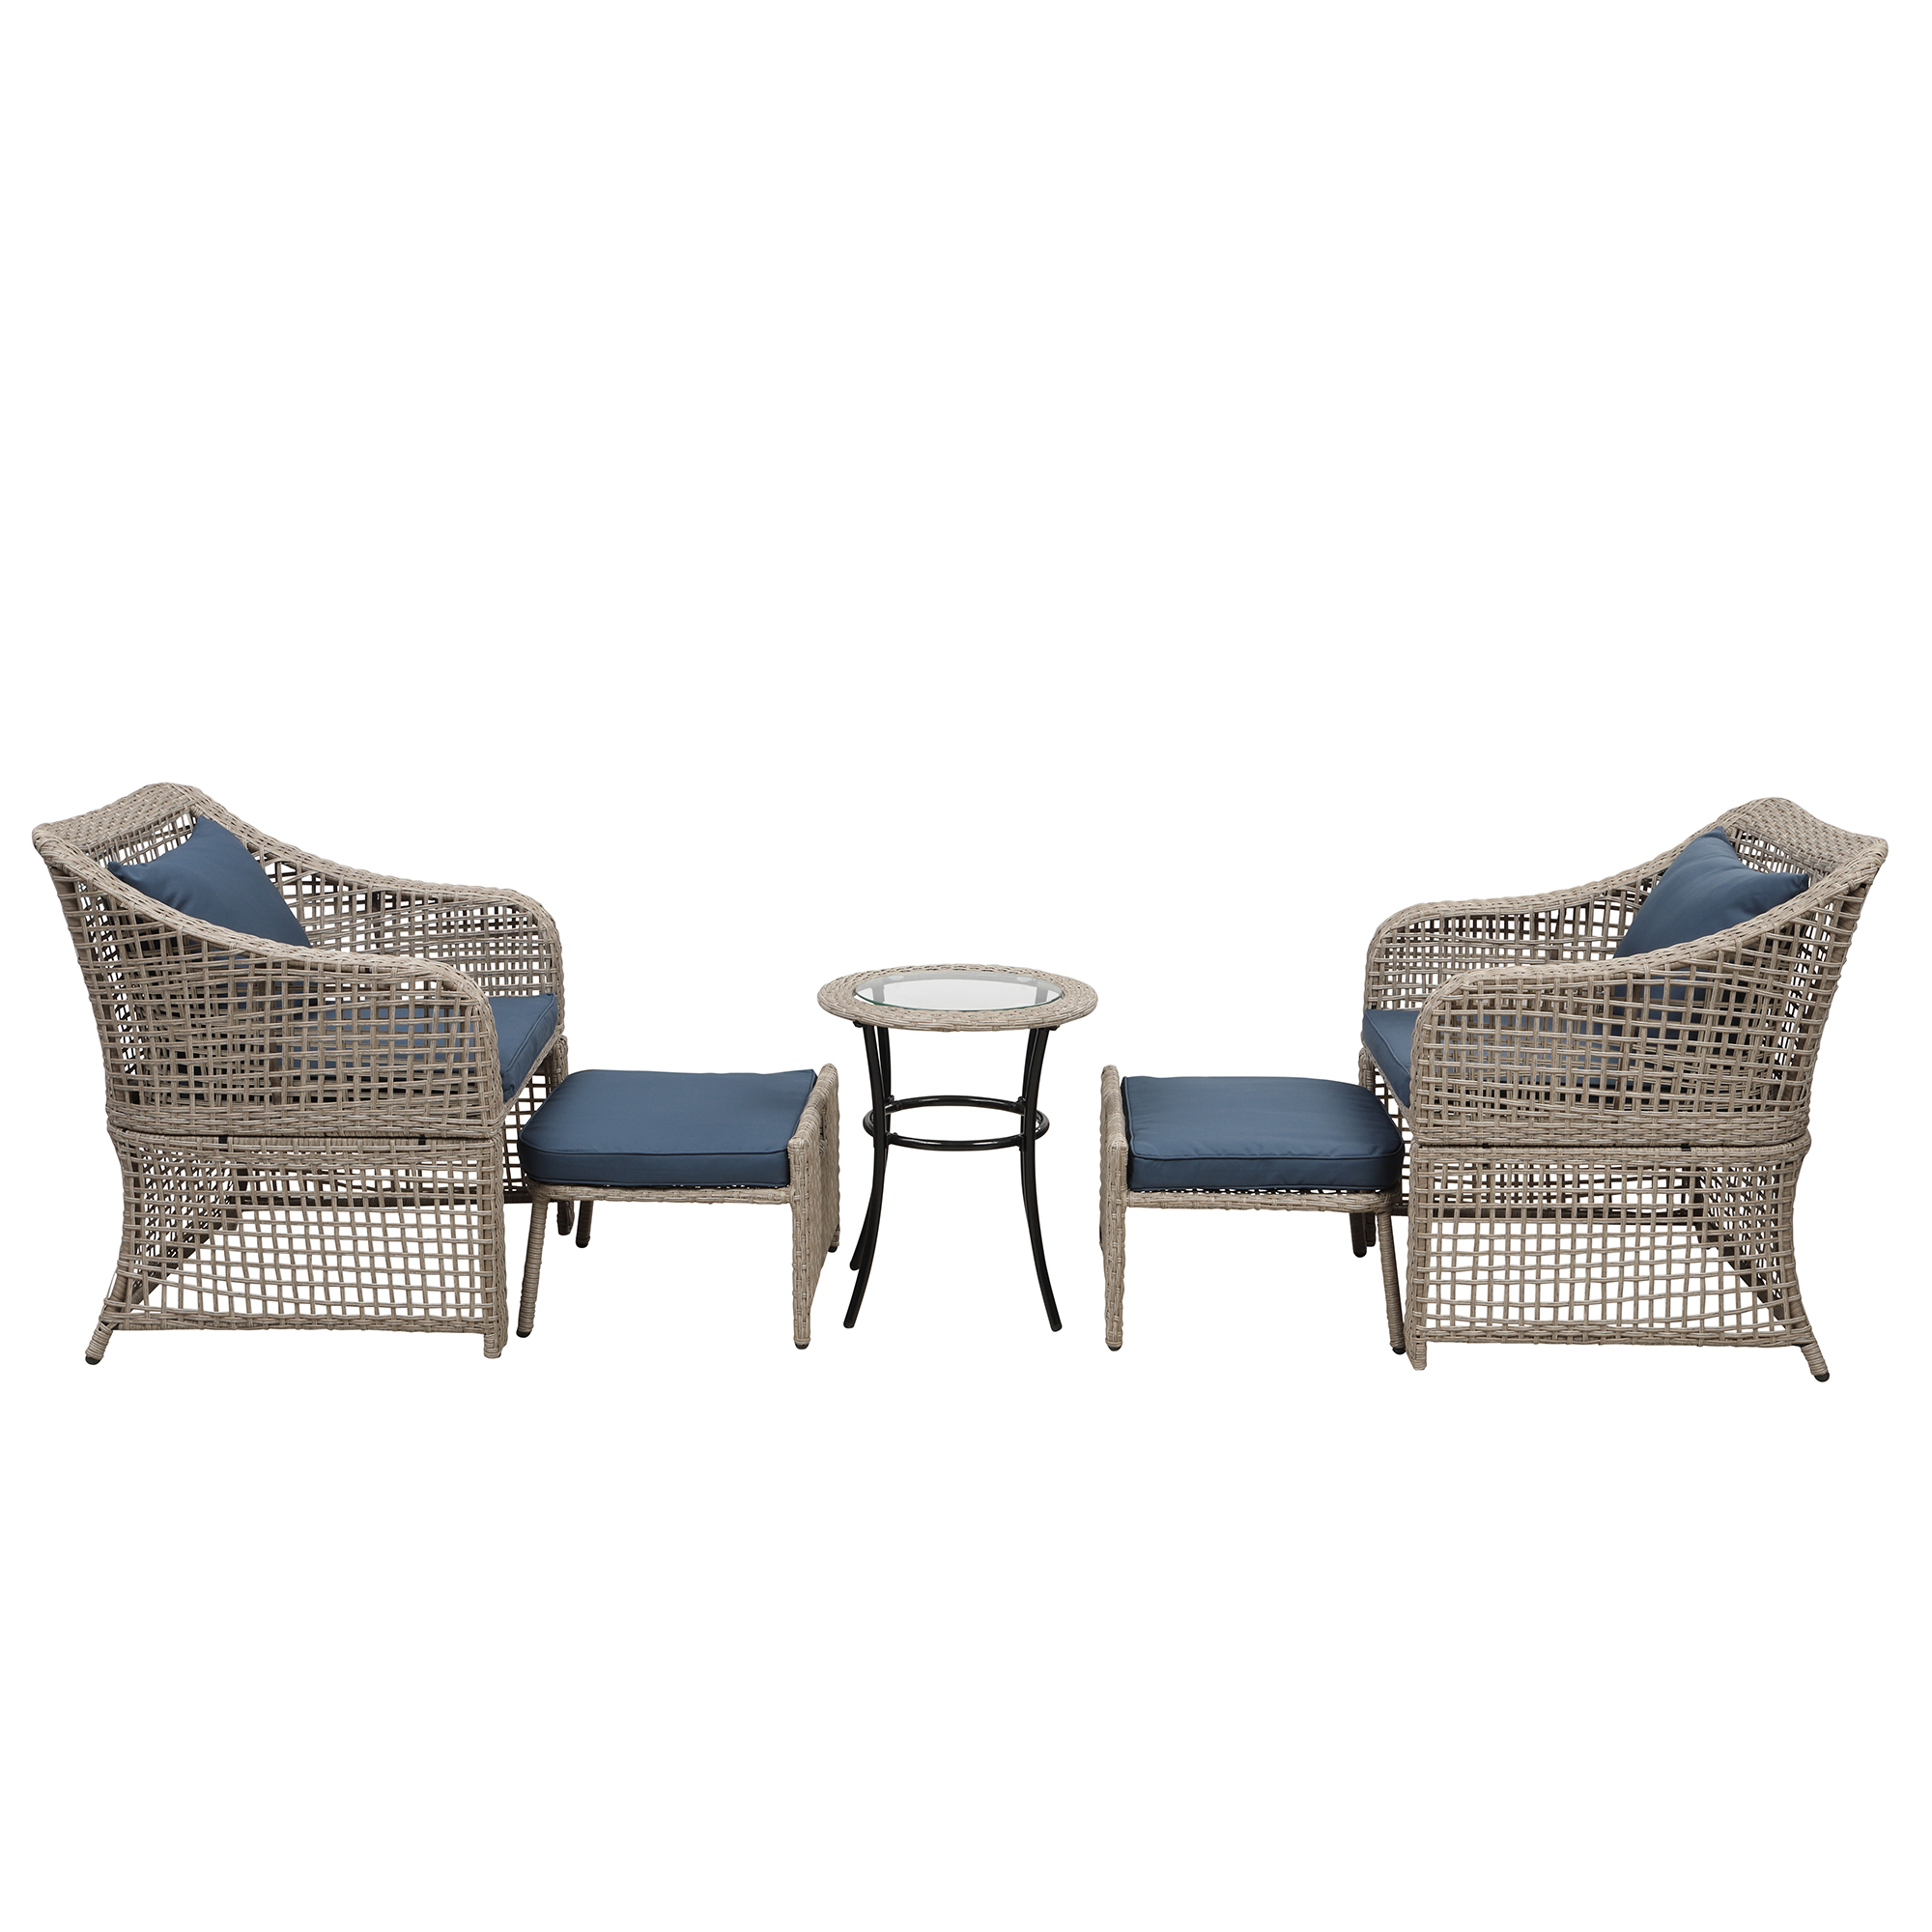 Patio Conversation Set, 5 Piece Outdoor Patio Furniture Sets with 2 Cushioned Chairs, 2 Ottoman, Glass Table, PE Wicker Rattan Outdoor Lounge Chair Chat Bistro Set for Backyard, Porch, Garden, LLL325 - image 4 of 9